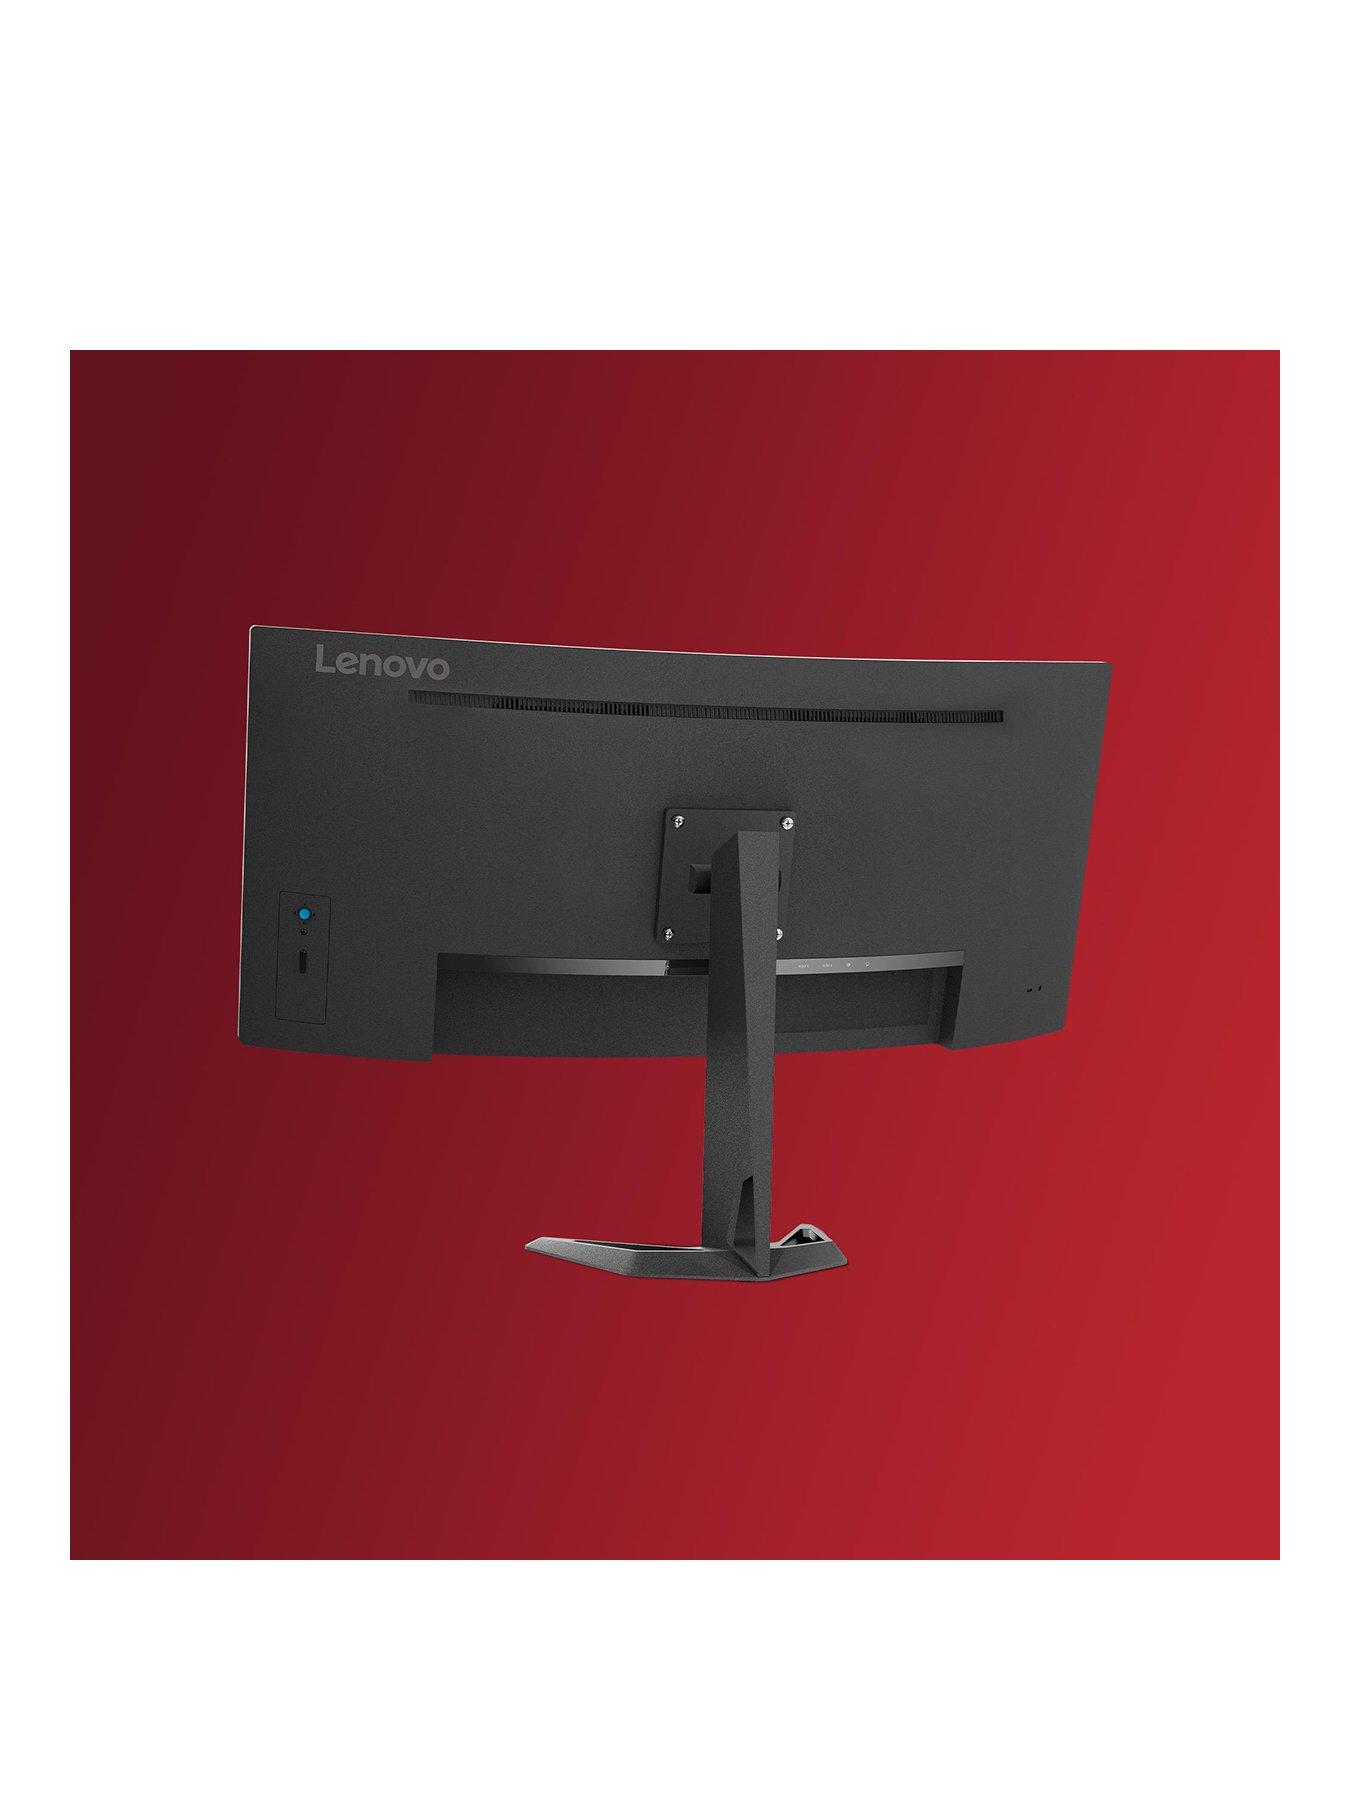 Lenovo G34w-30 34-inch Ultrawide Curved Gaming Monitor with HDR10 and AMD